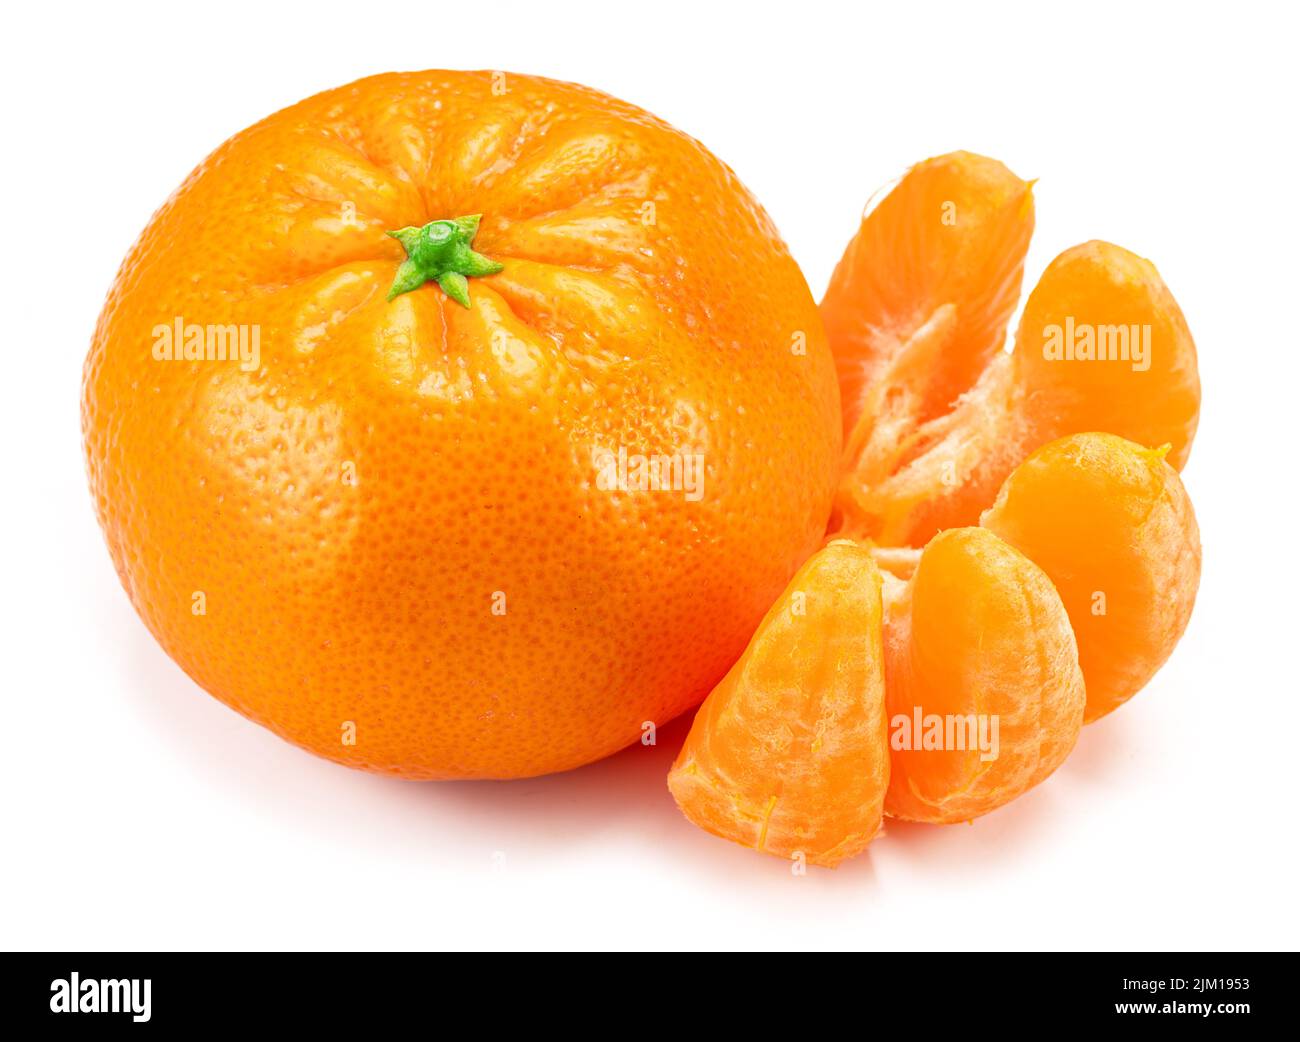 Ripe tangerine fruits with and mandarin slices on white background. Stock Photo